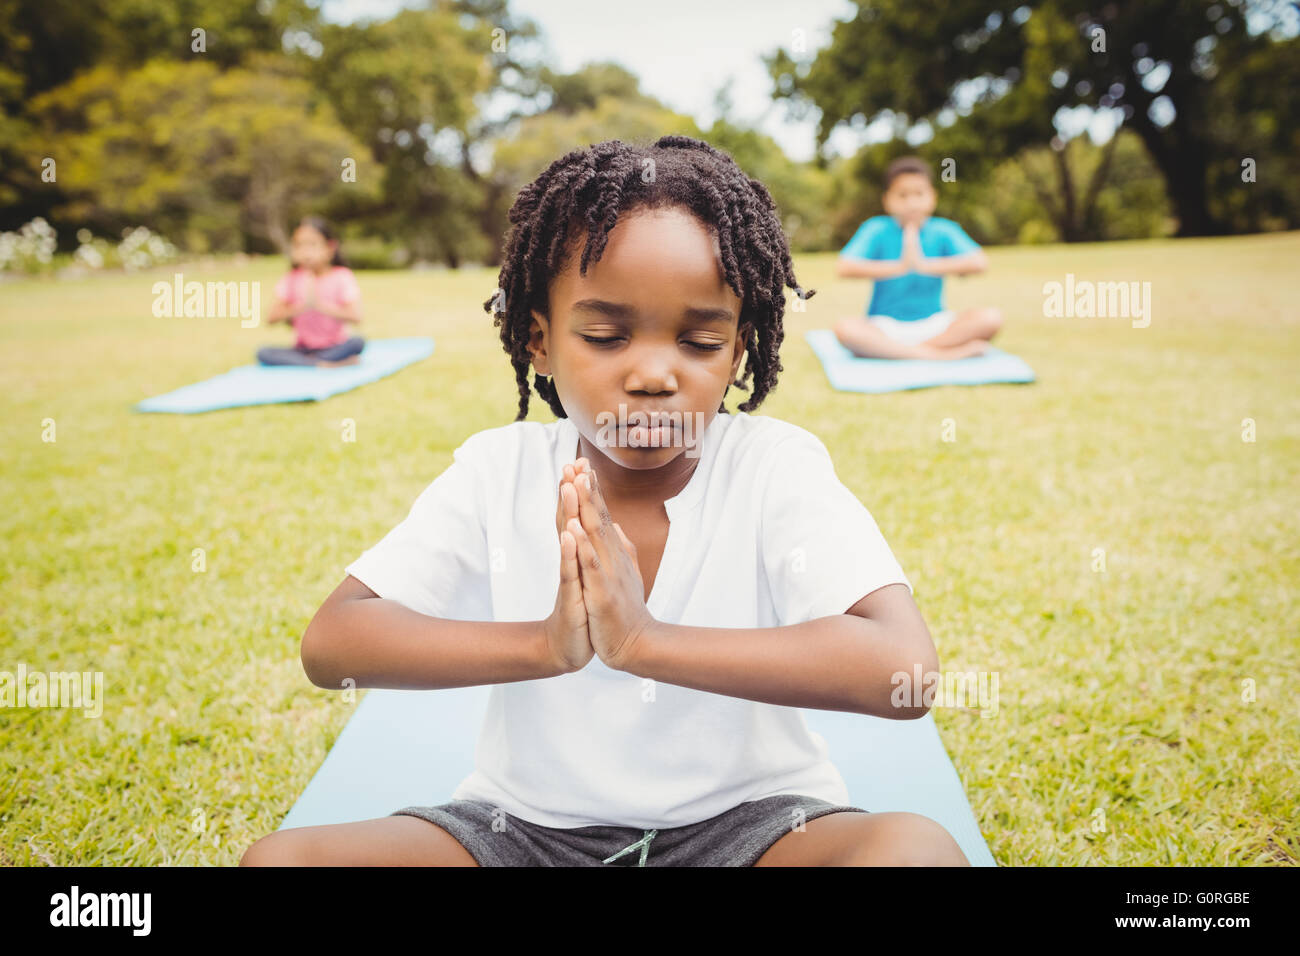 Portrait of child doing yoga with friends Stock Photo